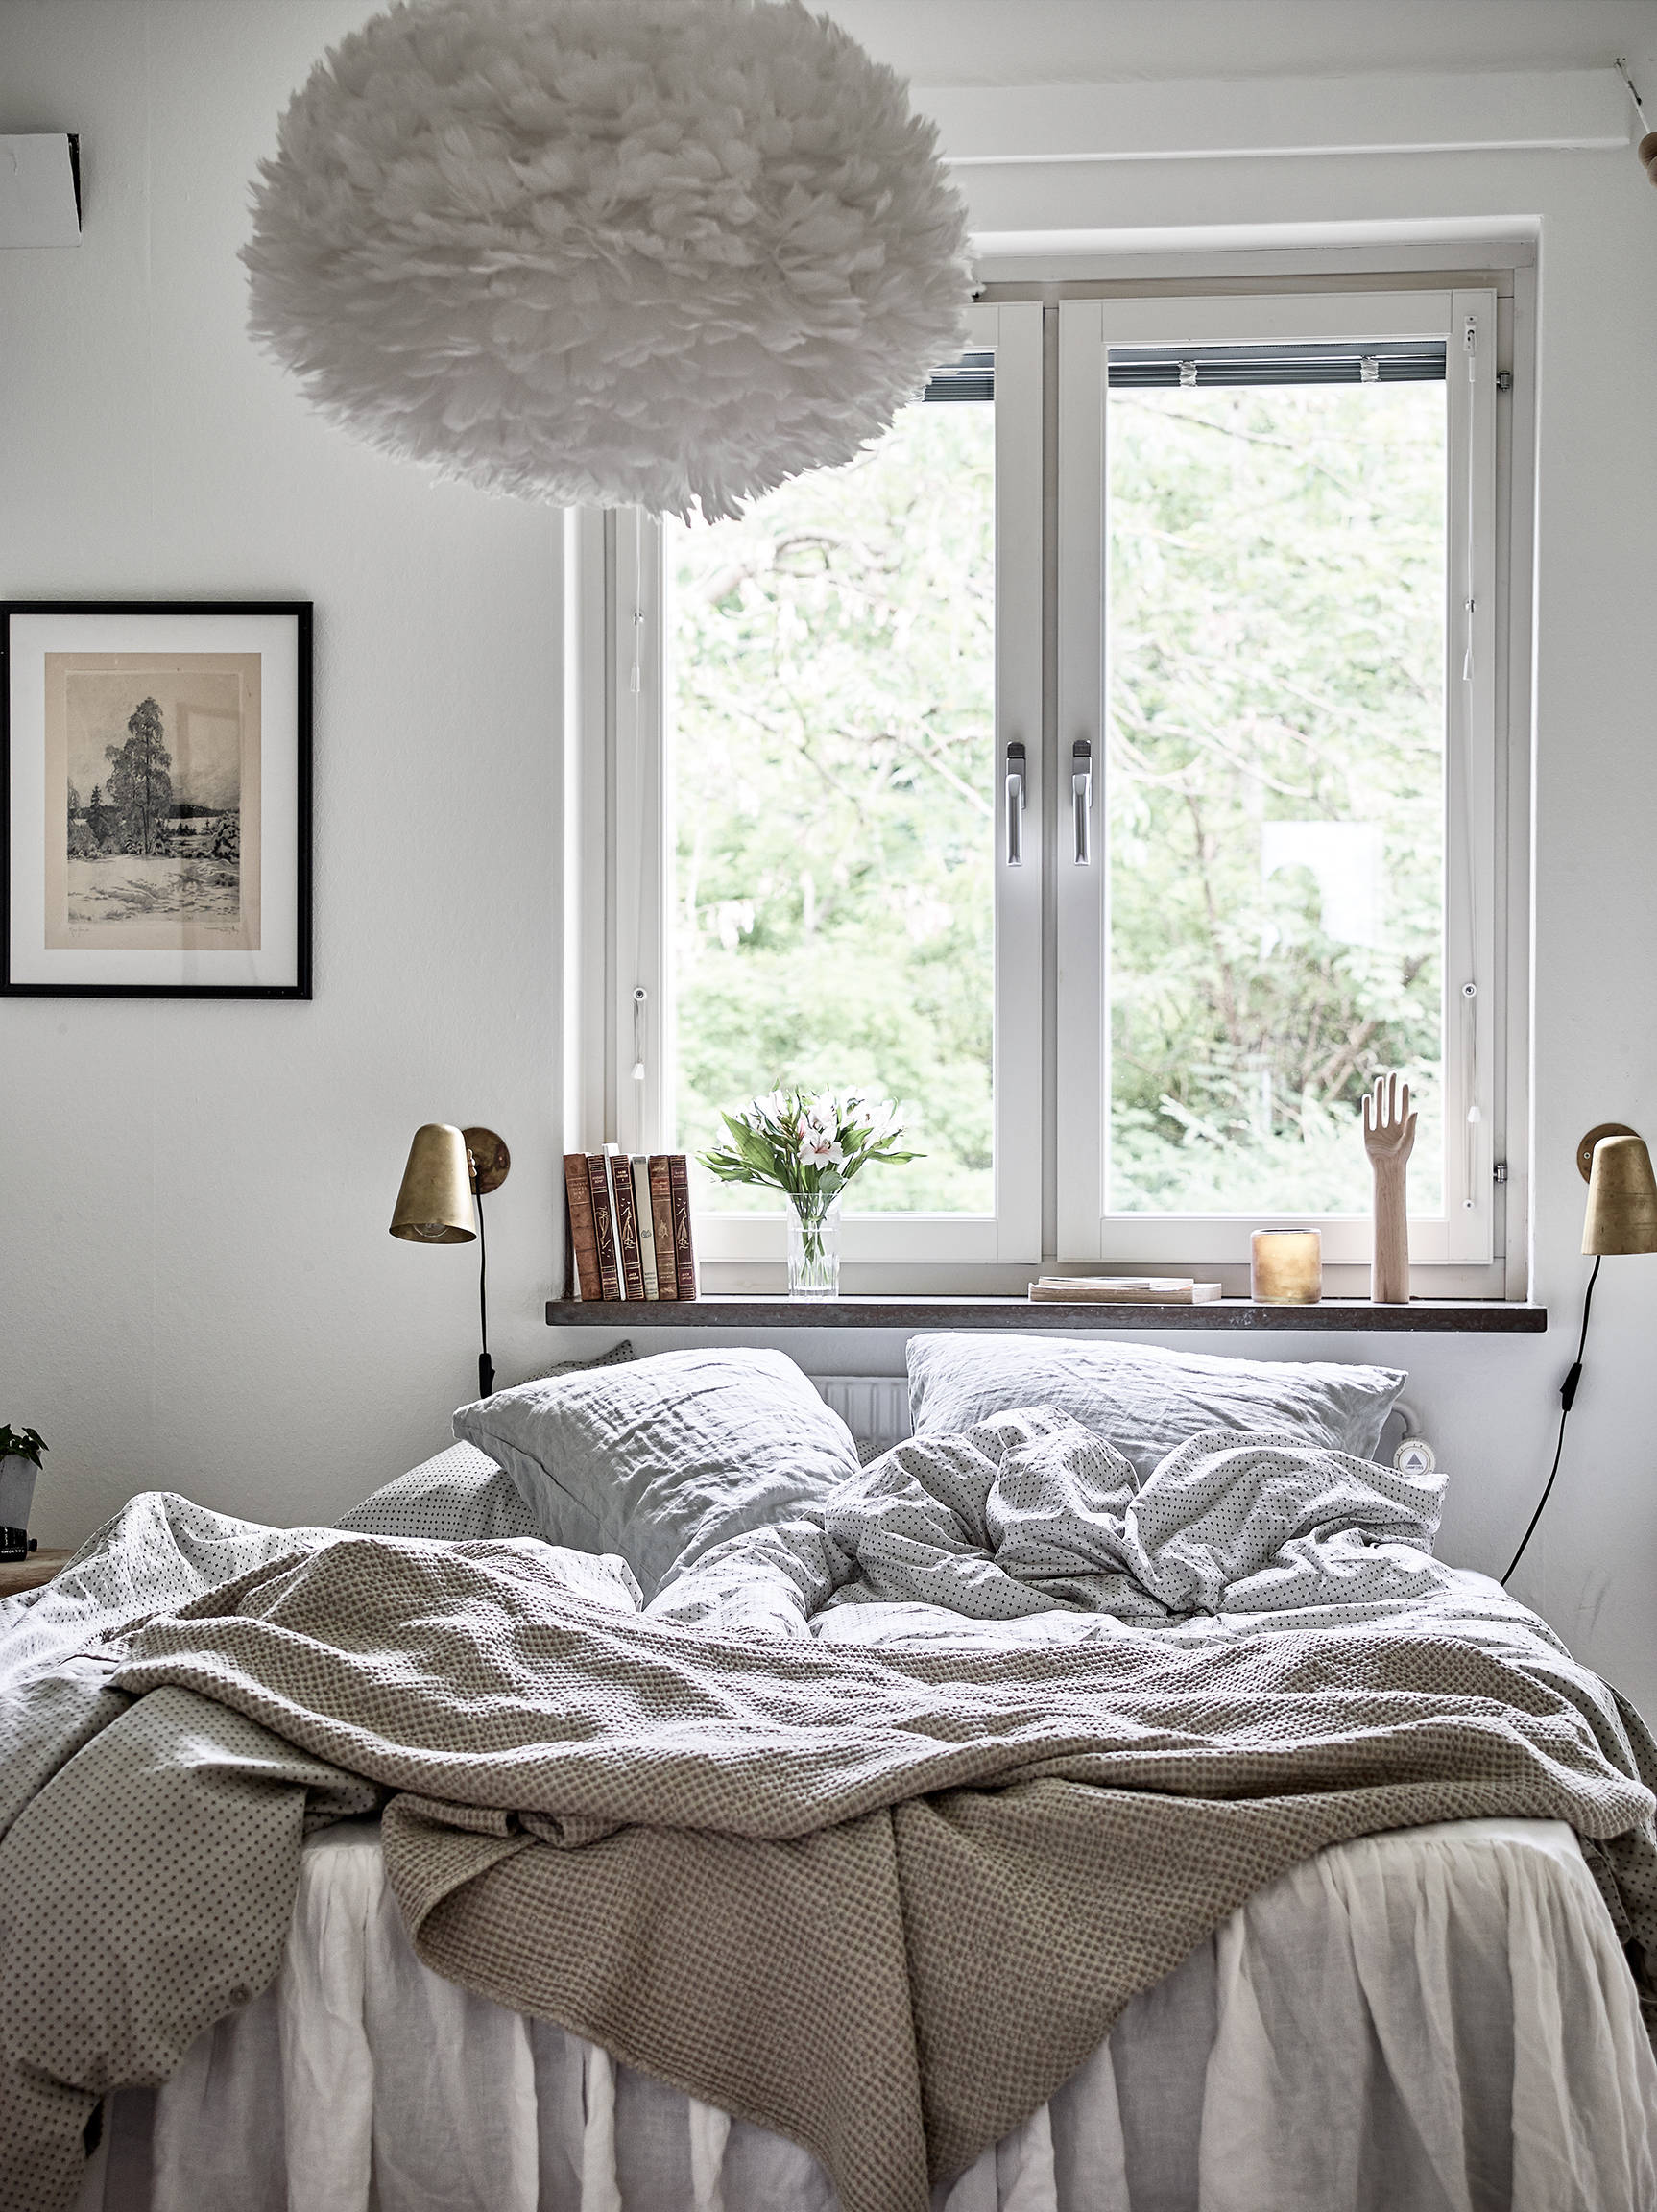 Dreamy bedroom - and how to get the look - via cocolapinedesign.com